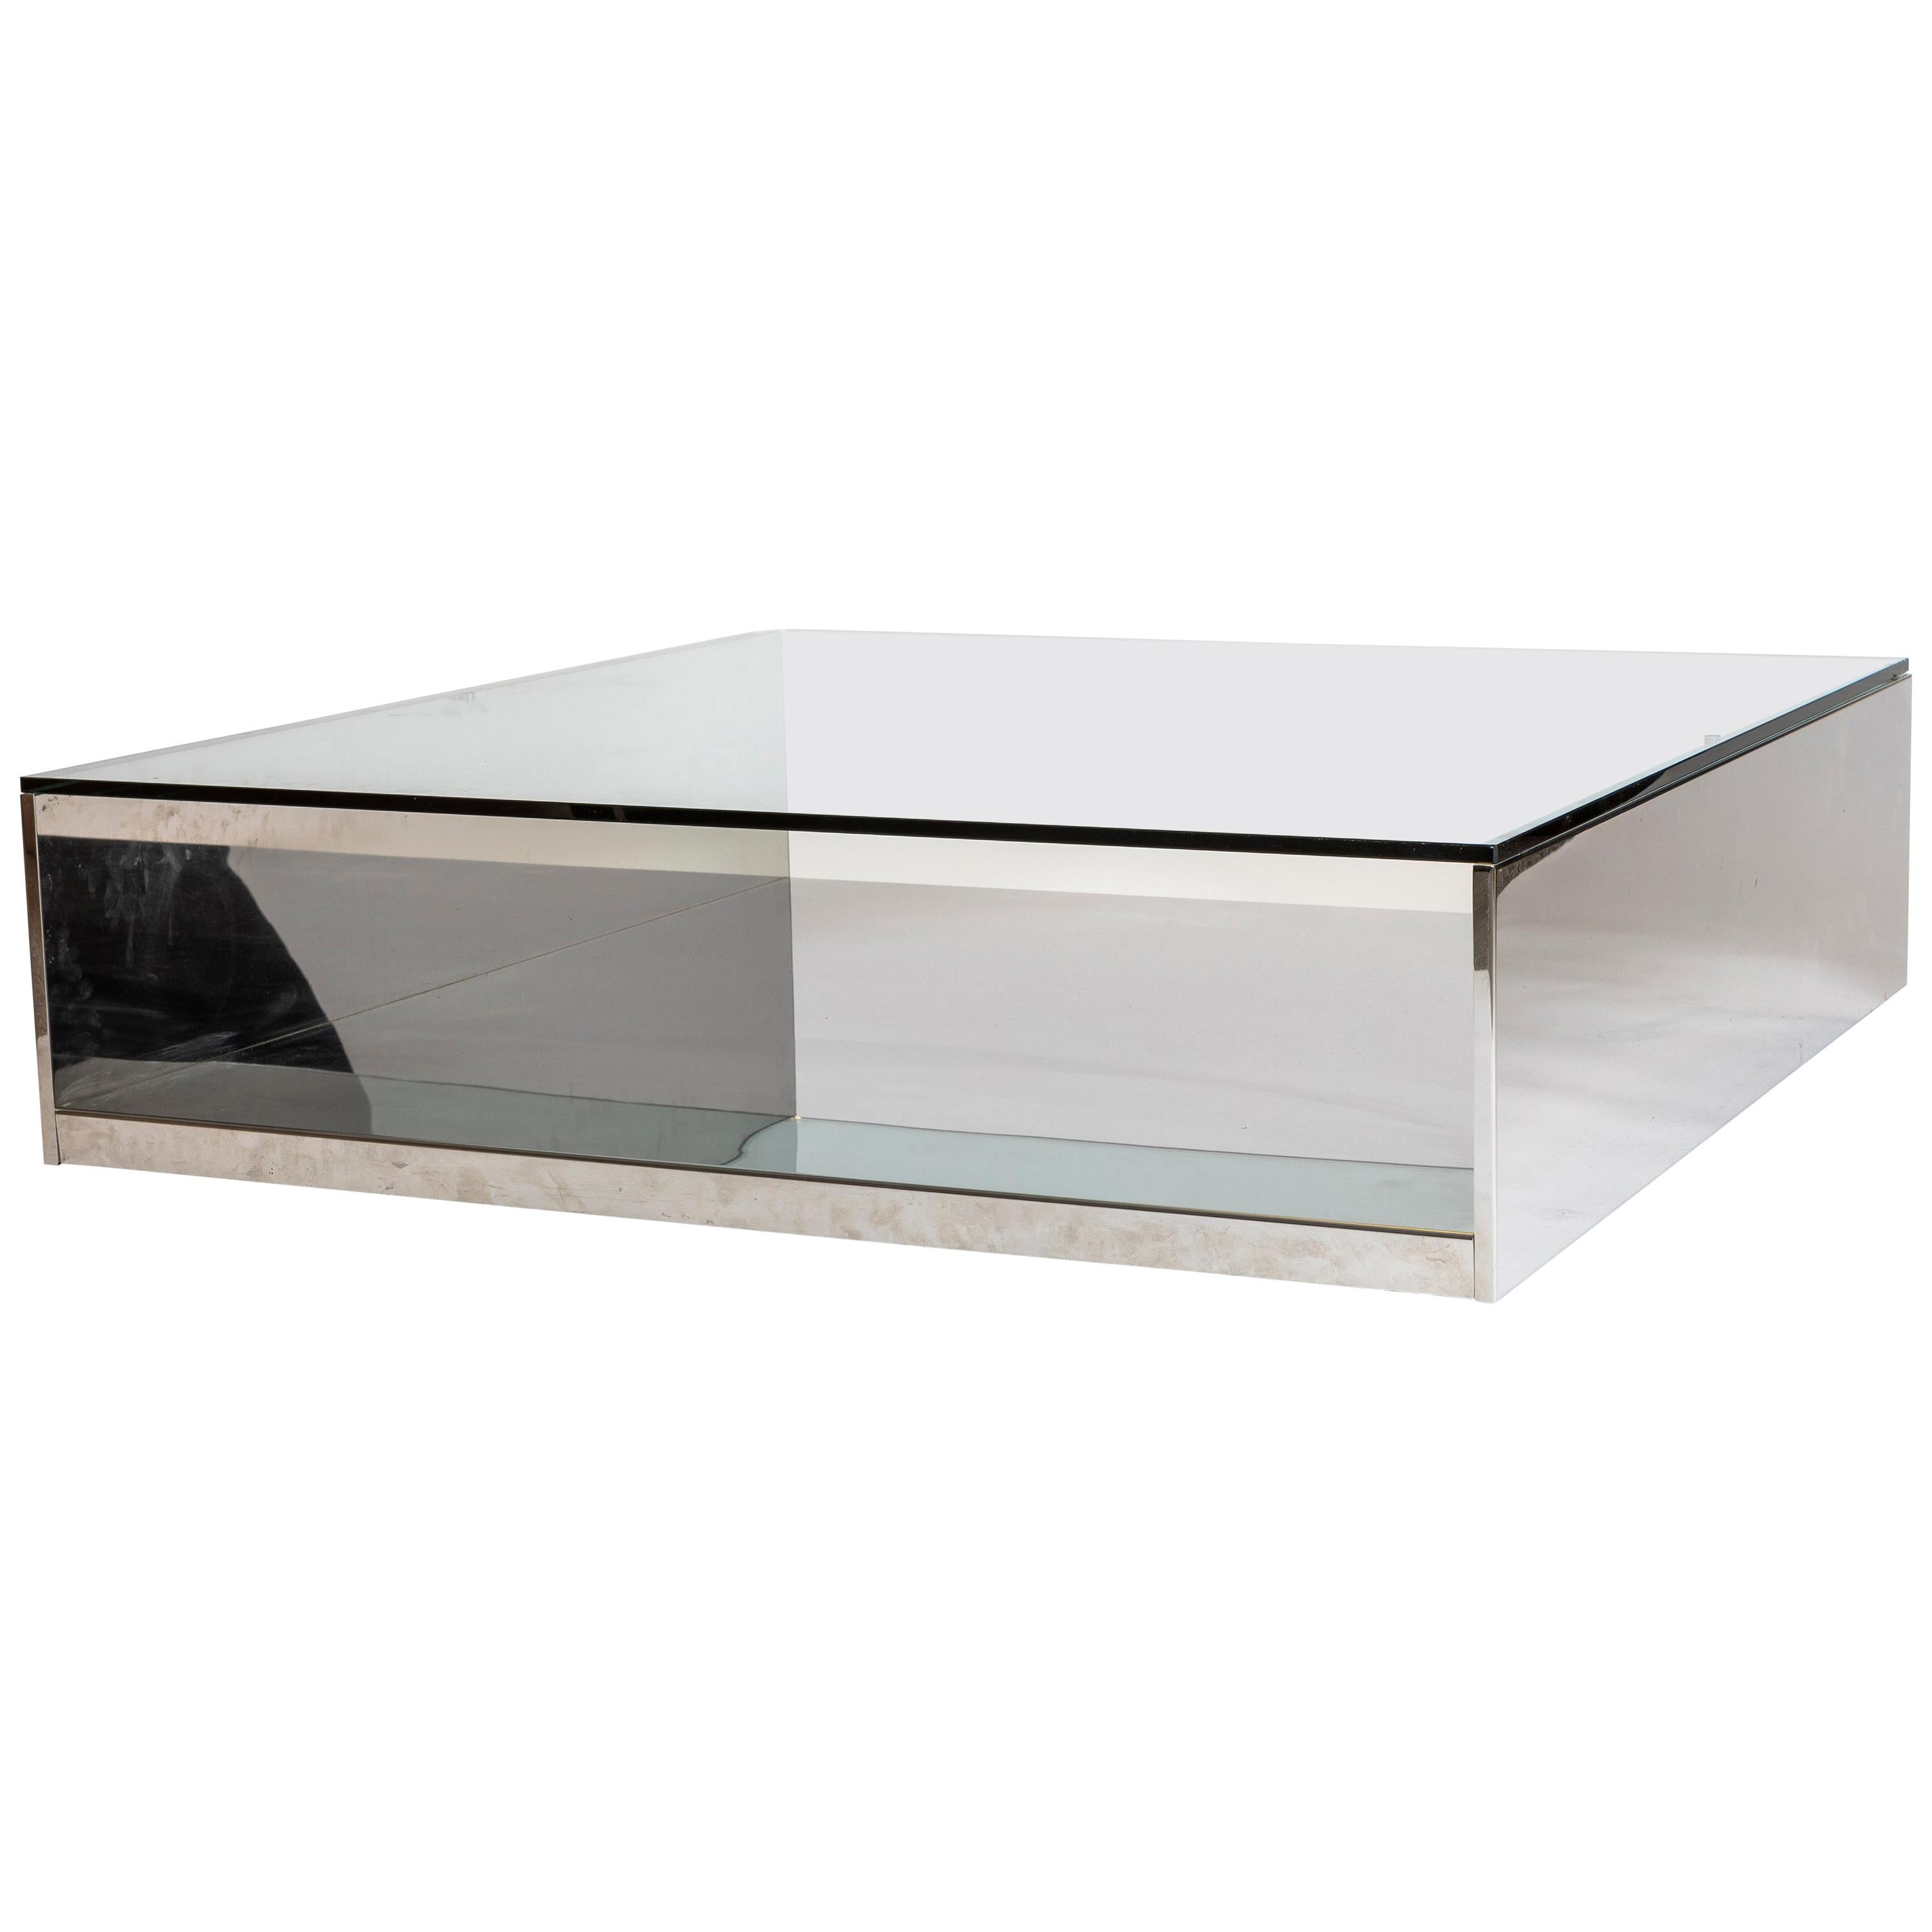 1970s Saporiti Embossed Chrome Coffee Table with Glass Top